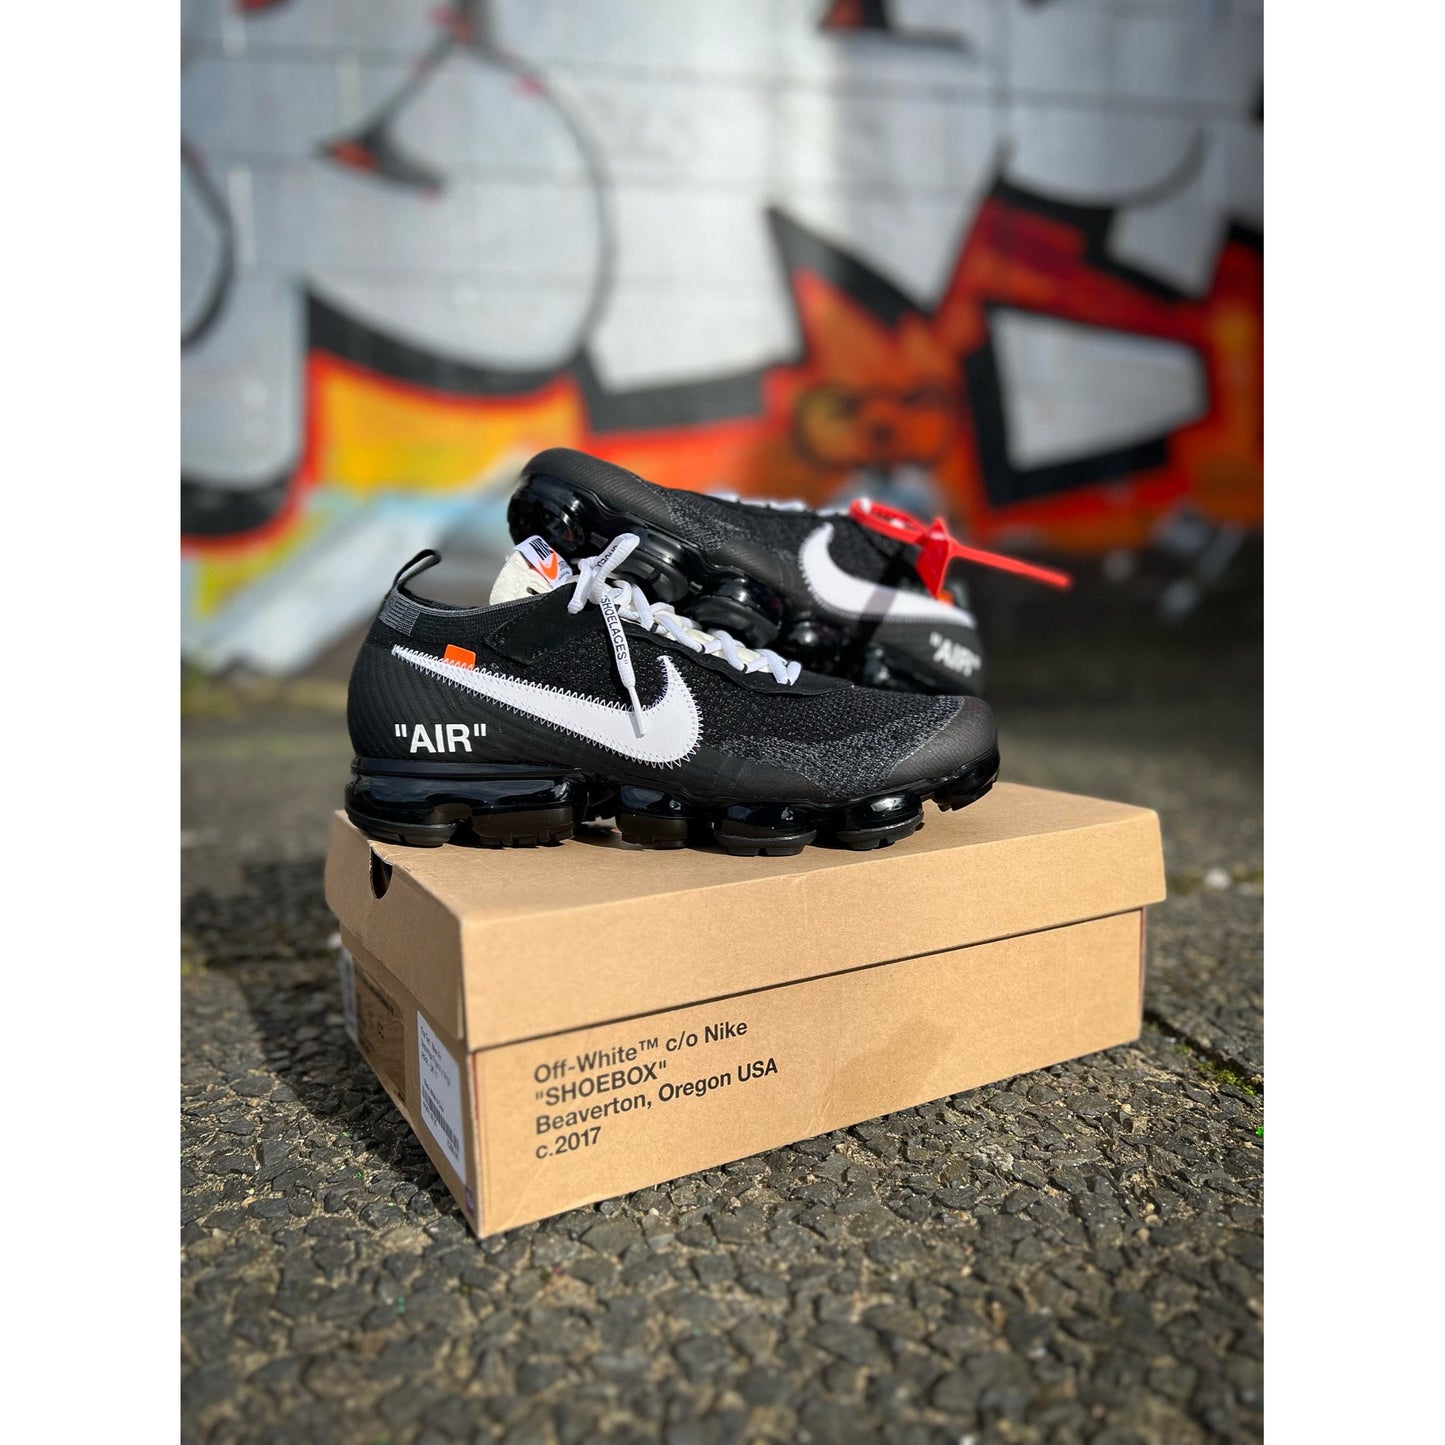 Nike Air Vapormax Off-White (2017) by Nike from £1400.00